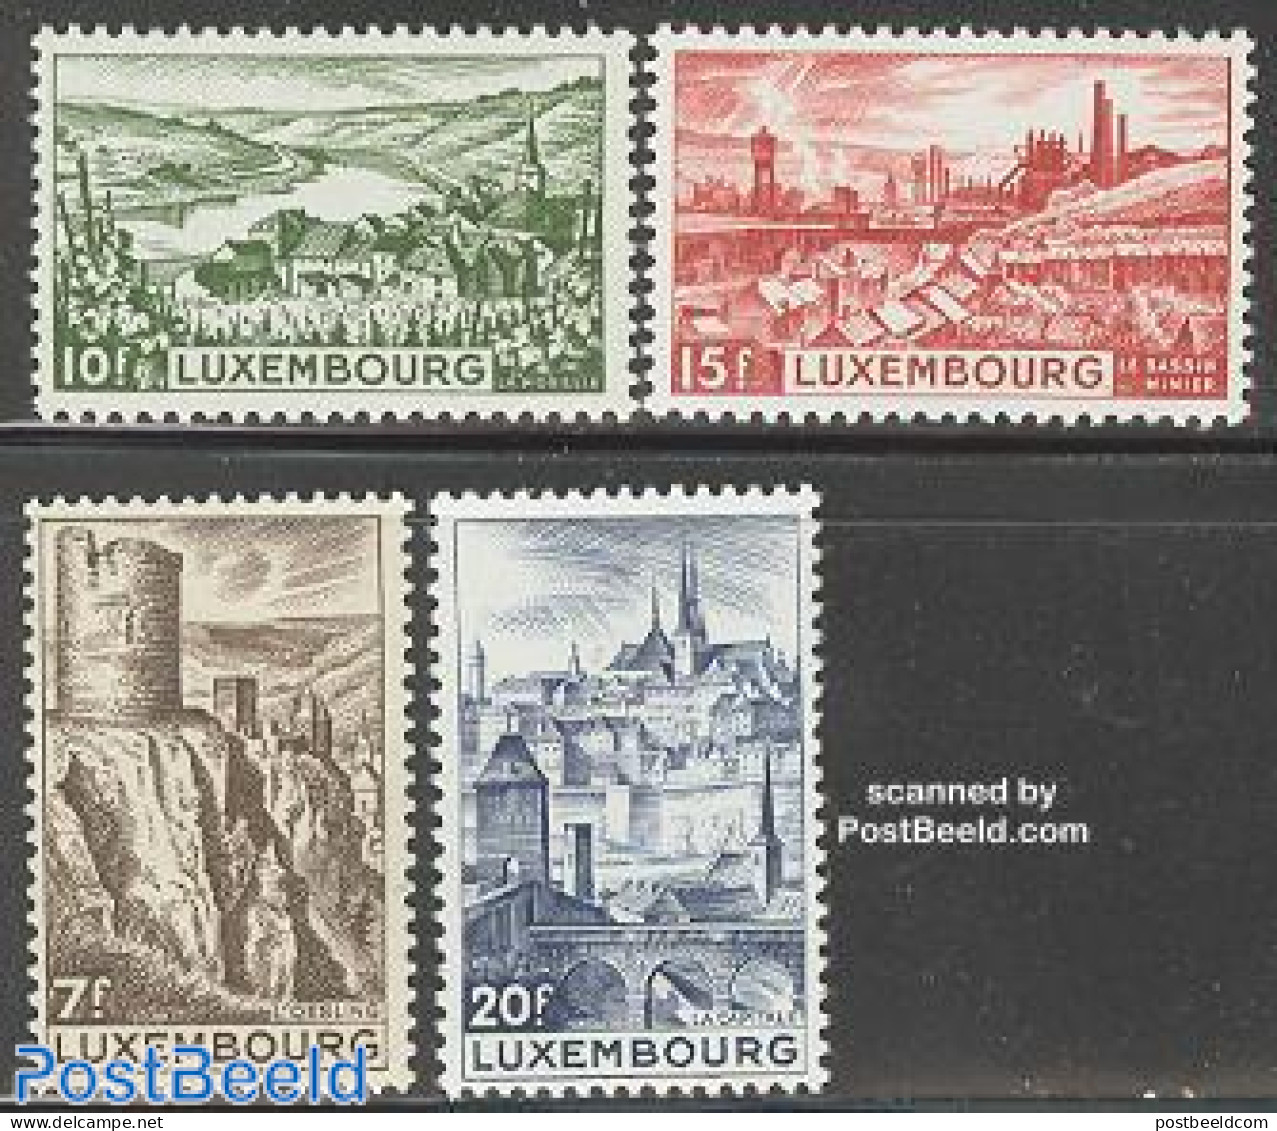 Luxemburg 1948 Landscapes 4v, Unused (hinged), Science - Mining - Art - Castles & Fortifications - Neufs